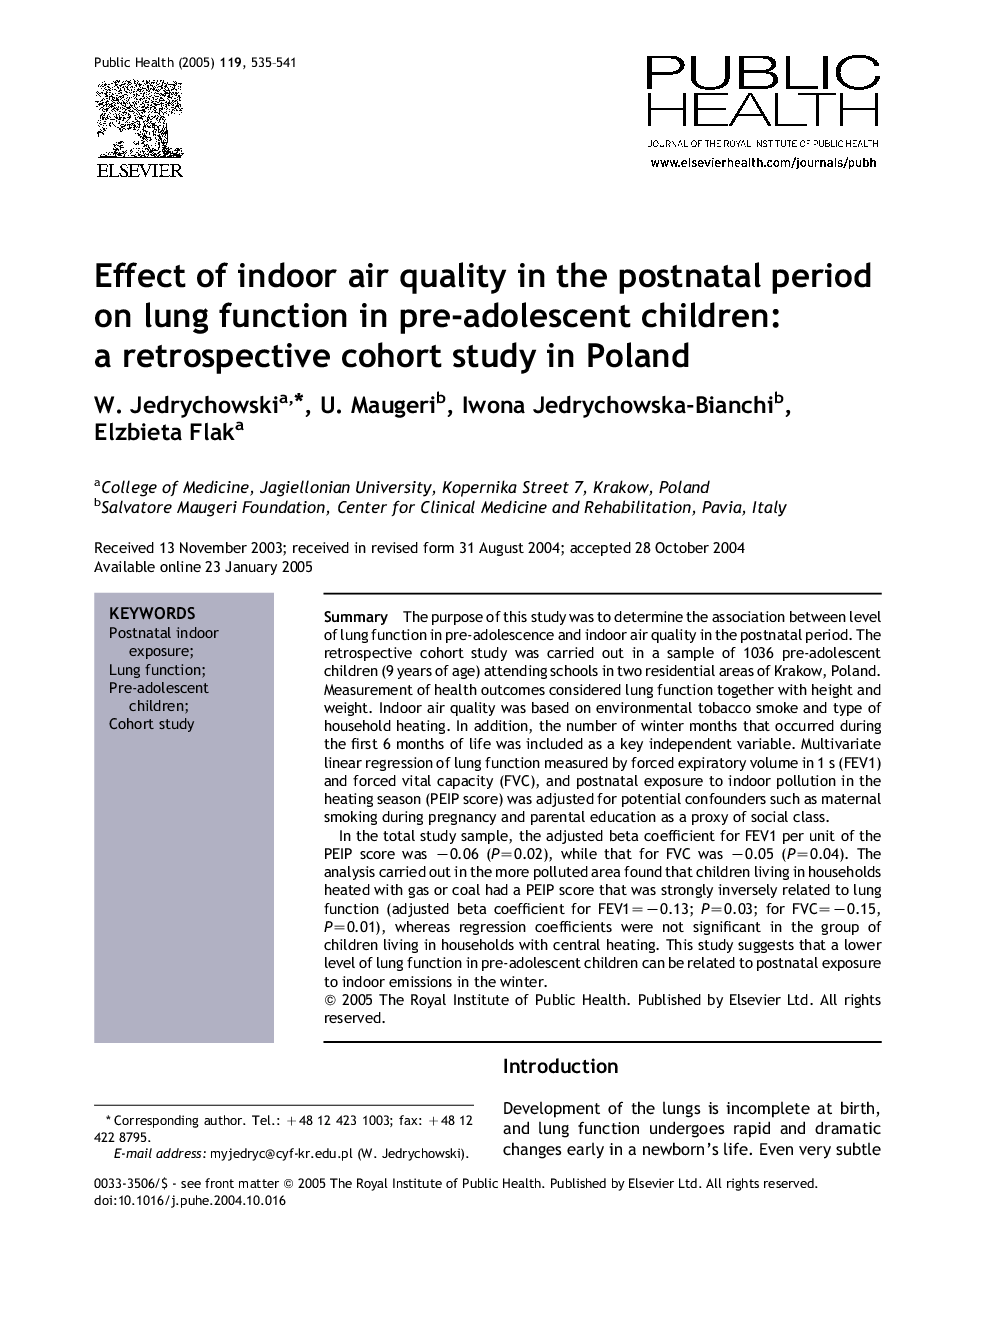 Effect of indoor air quality in the postnatal period on lung function in pre-adolescent children: a retrospective cohort study in Poland